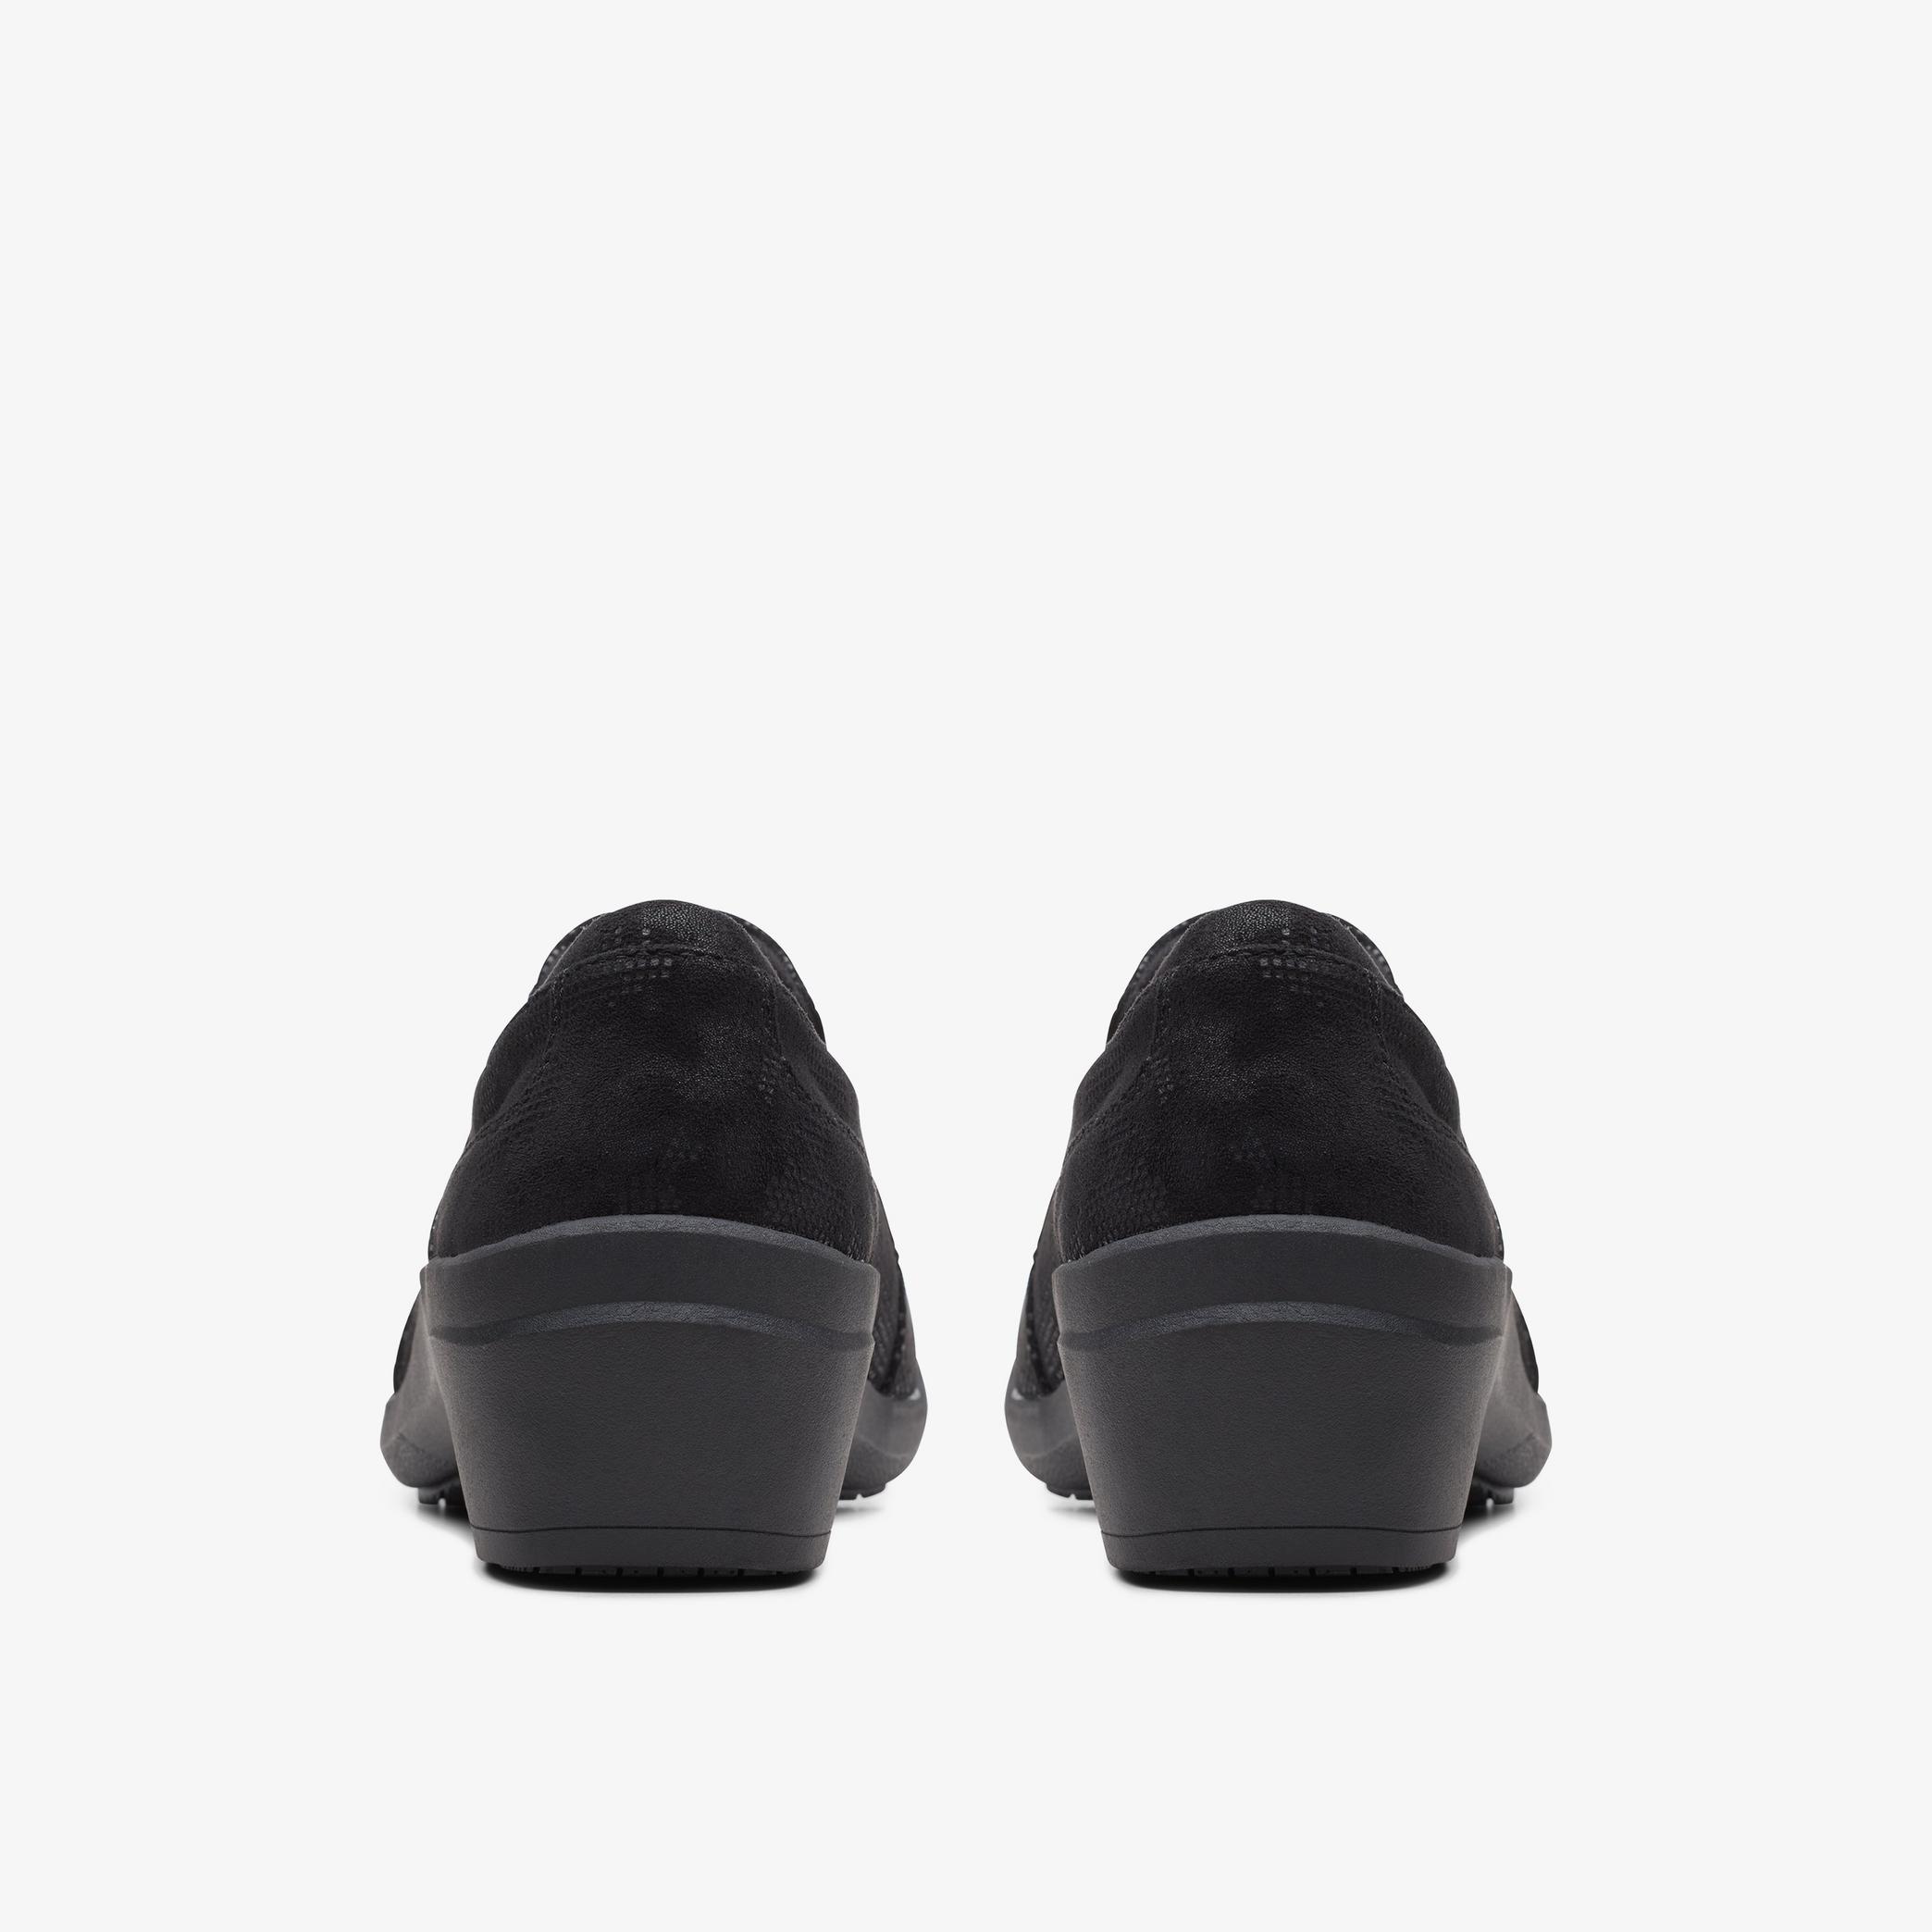 Talene Pace Black Interest Slip Ons, view 5 of 6